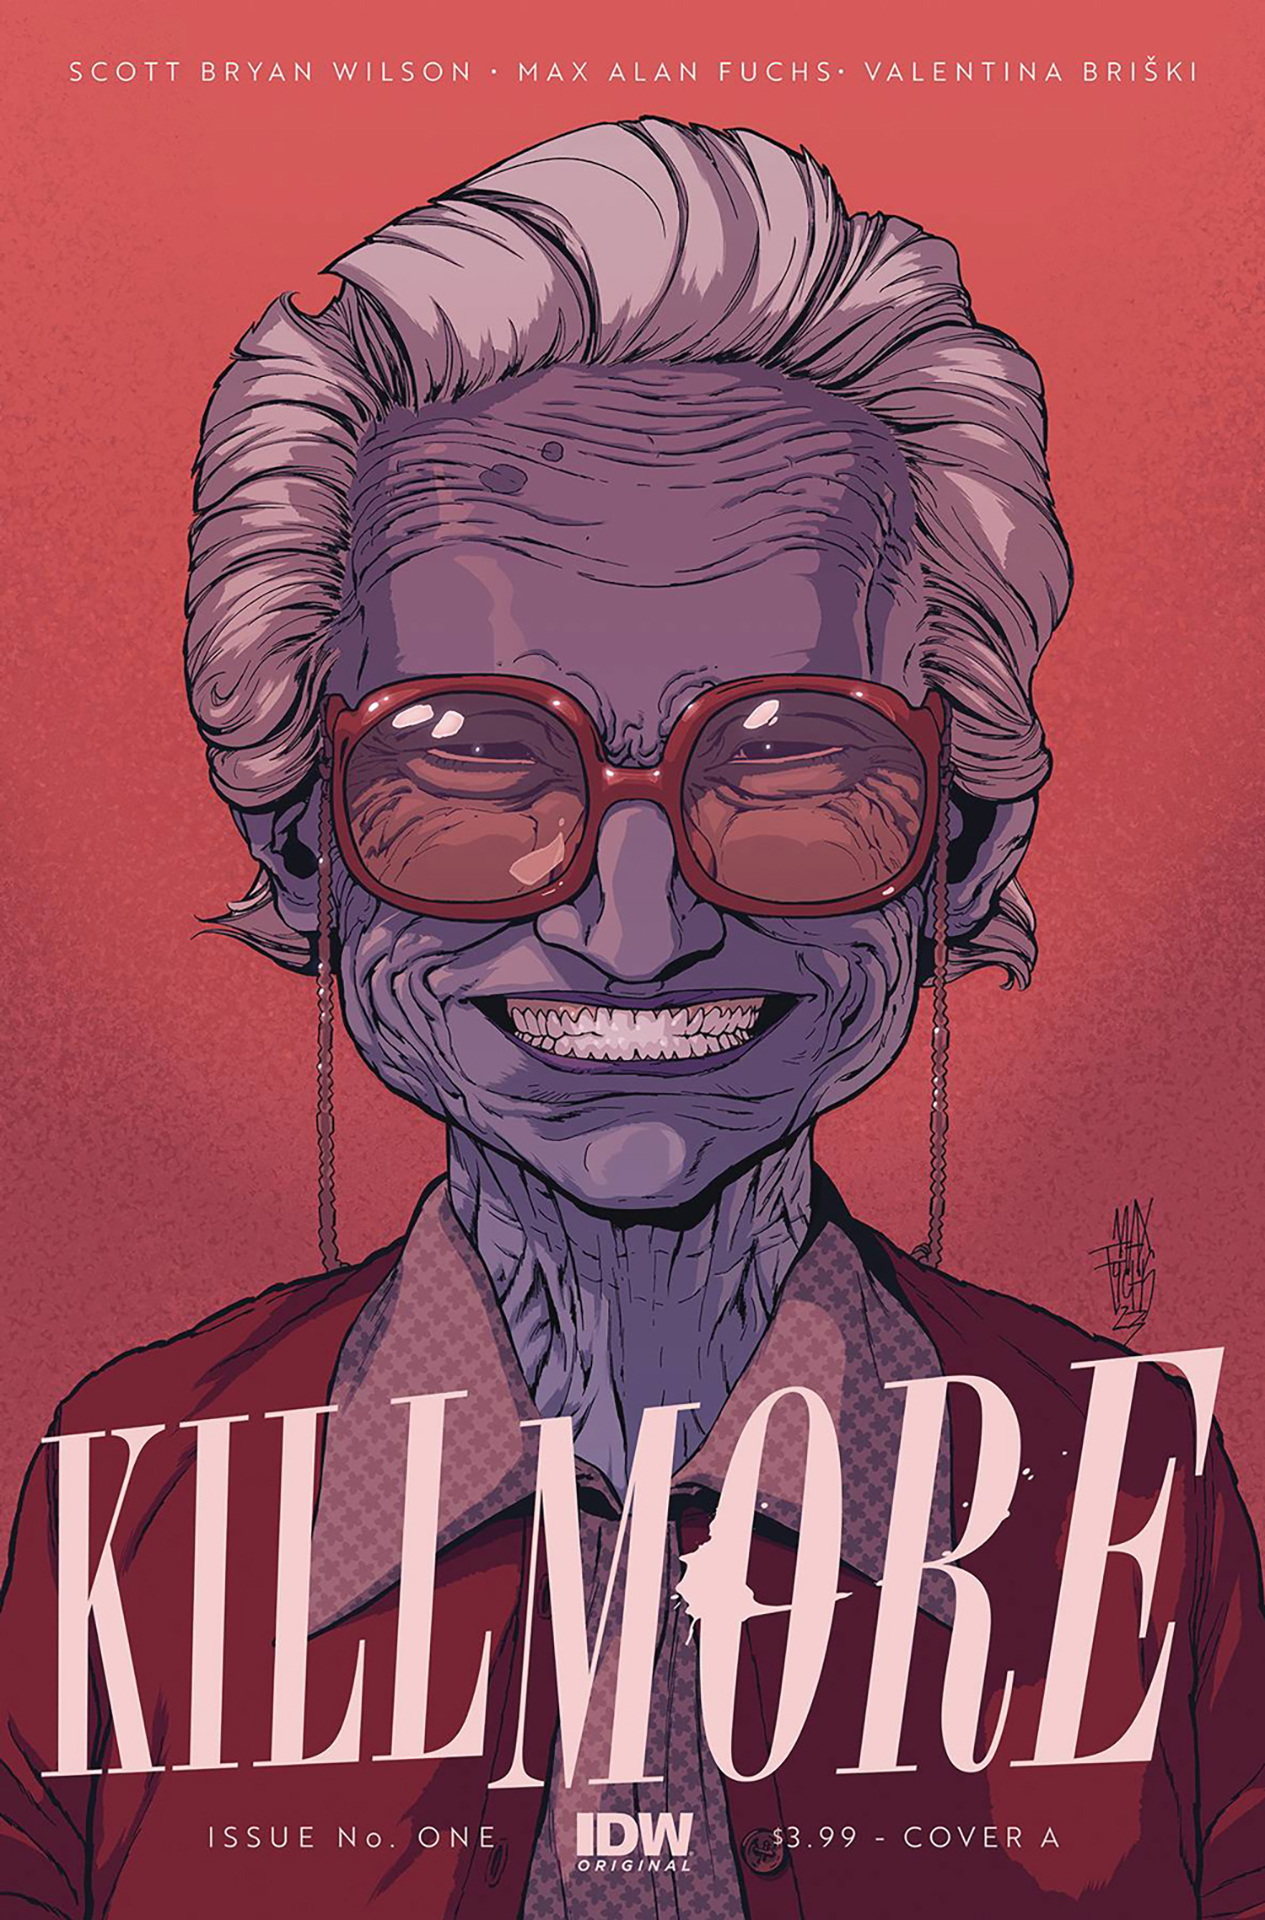 Eliminate More # 1 cover art by Max Alan Fuchs